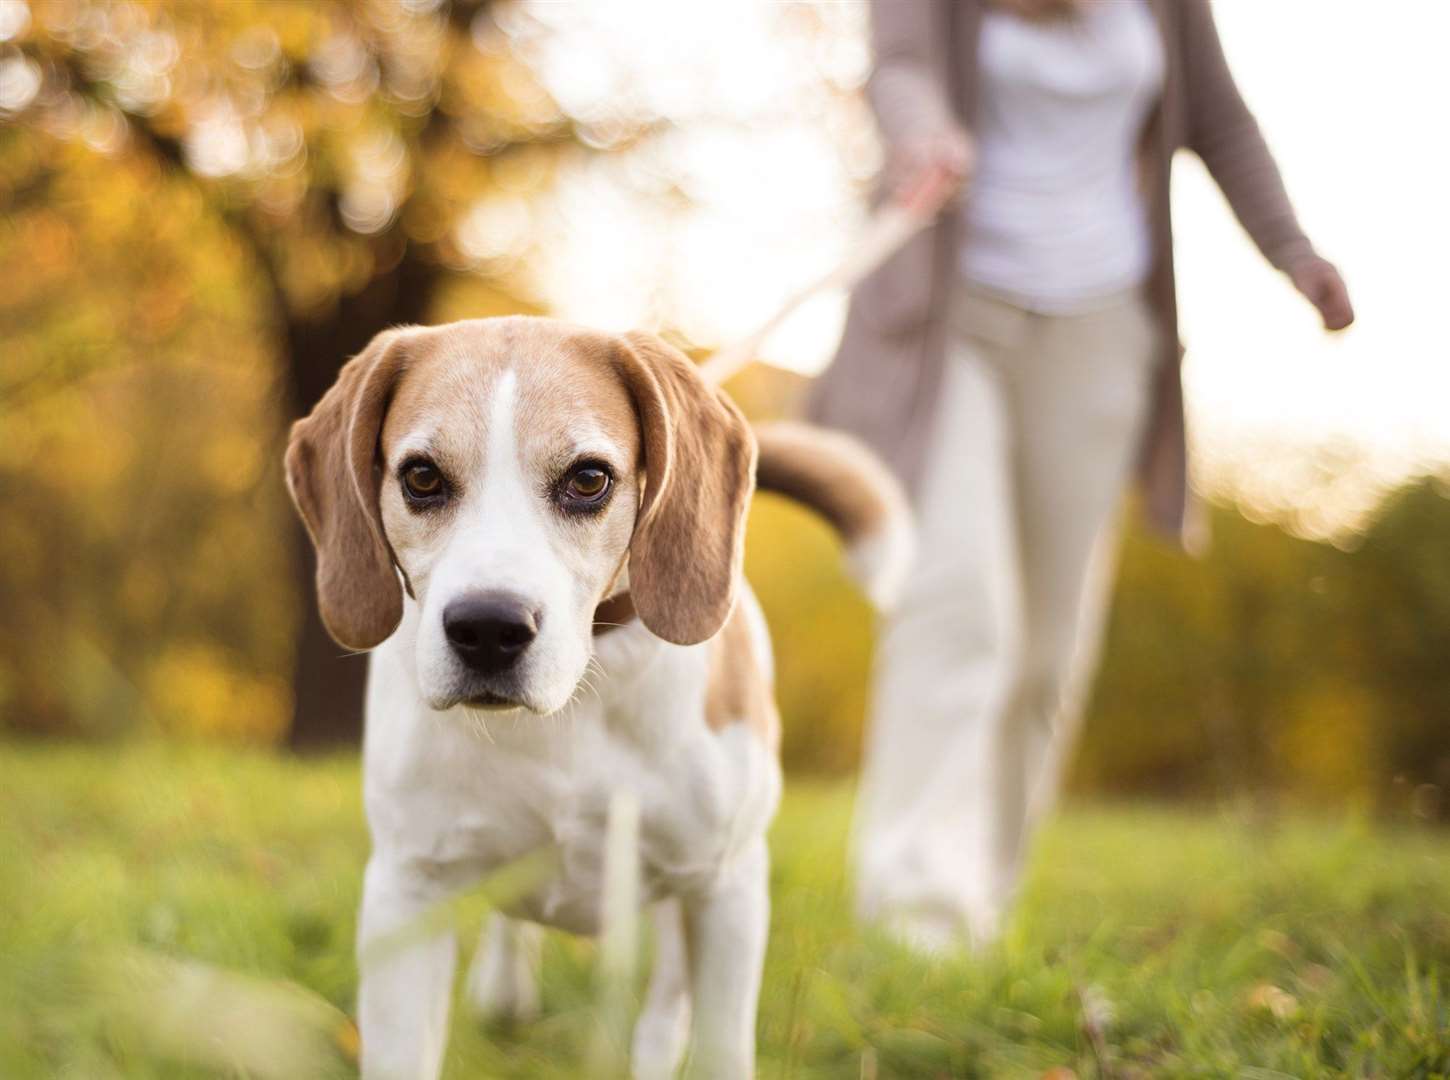 Dog walkers are being told to make sure their pets don't pick up or play with dead or injured birds. Photo: Stock image.